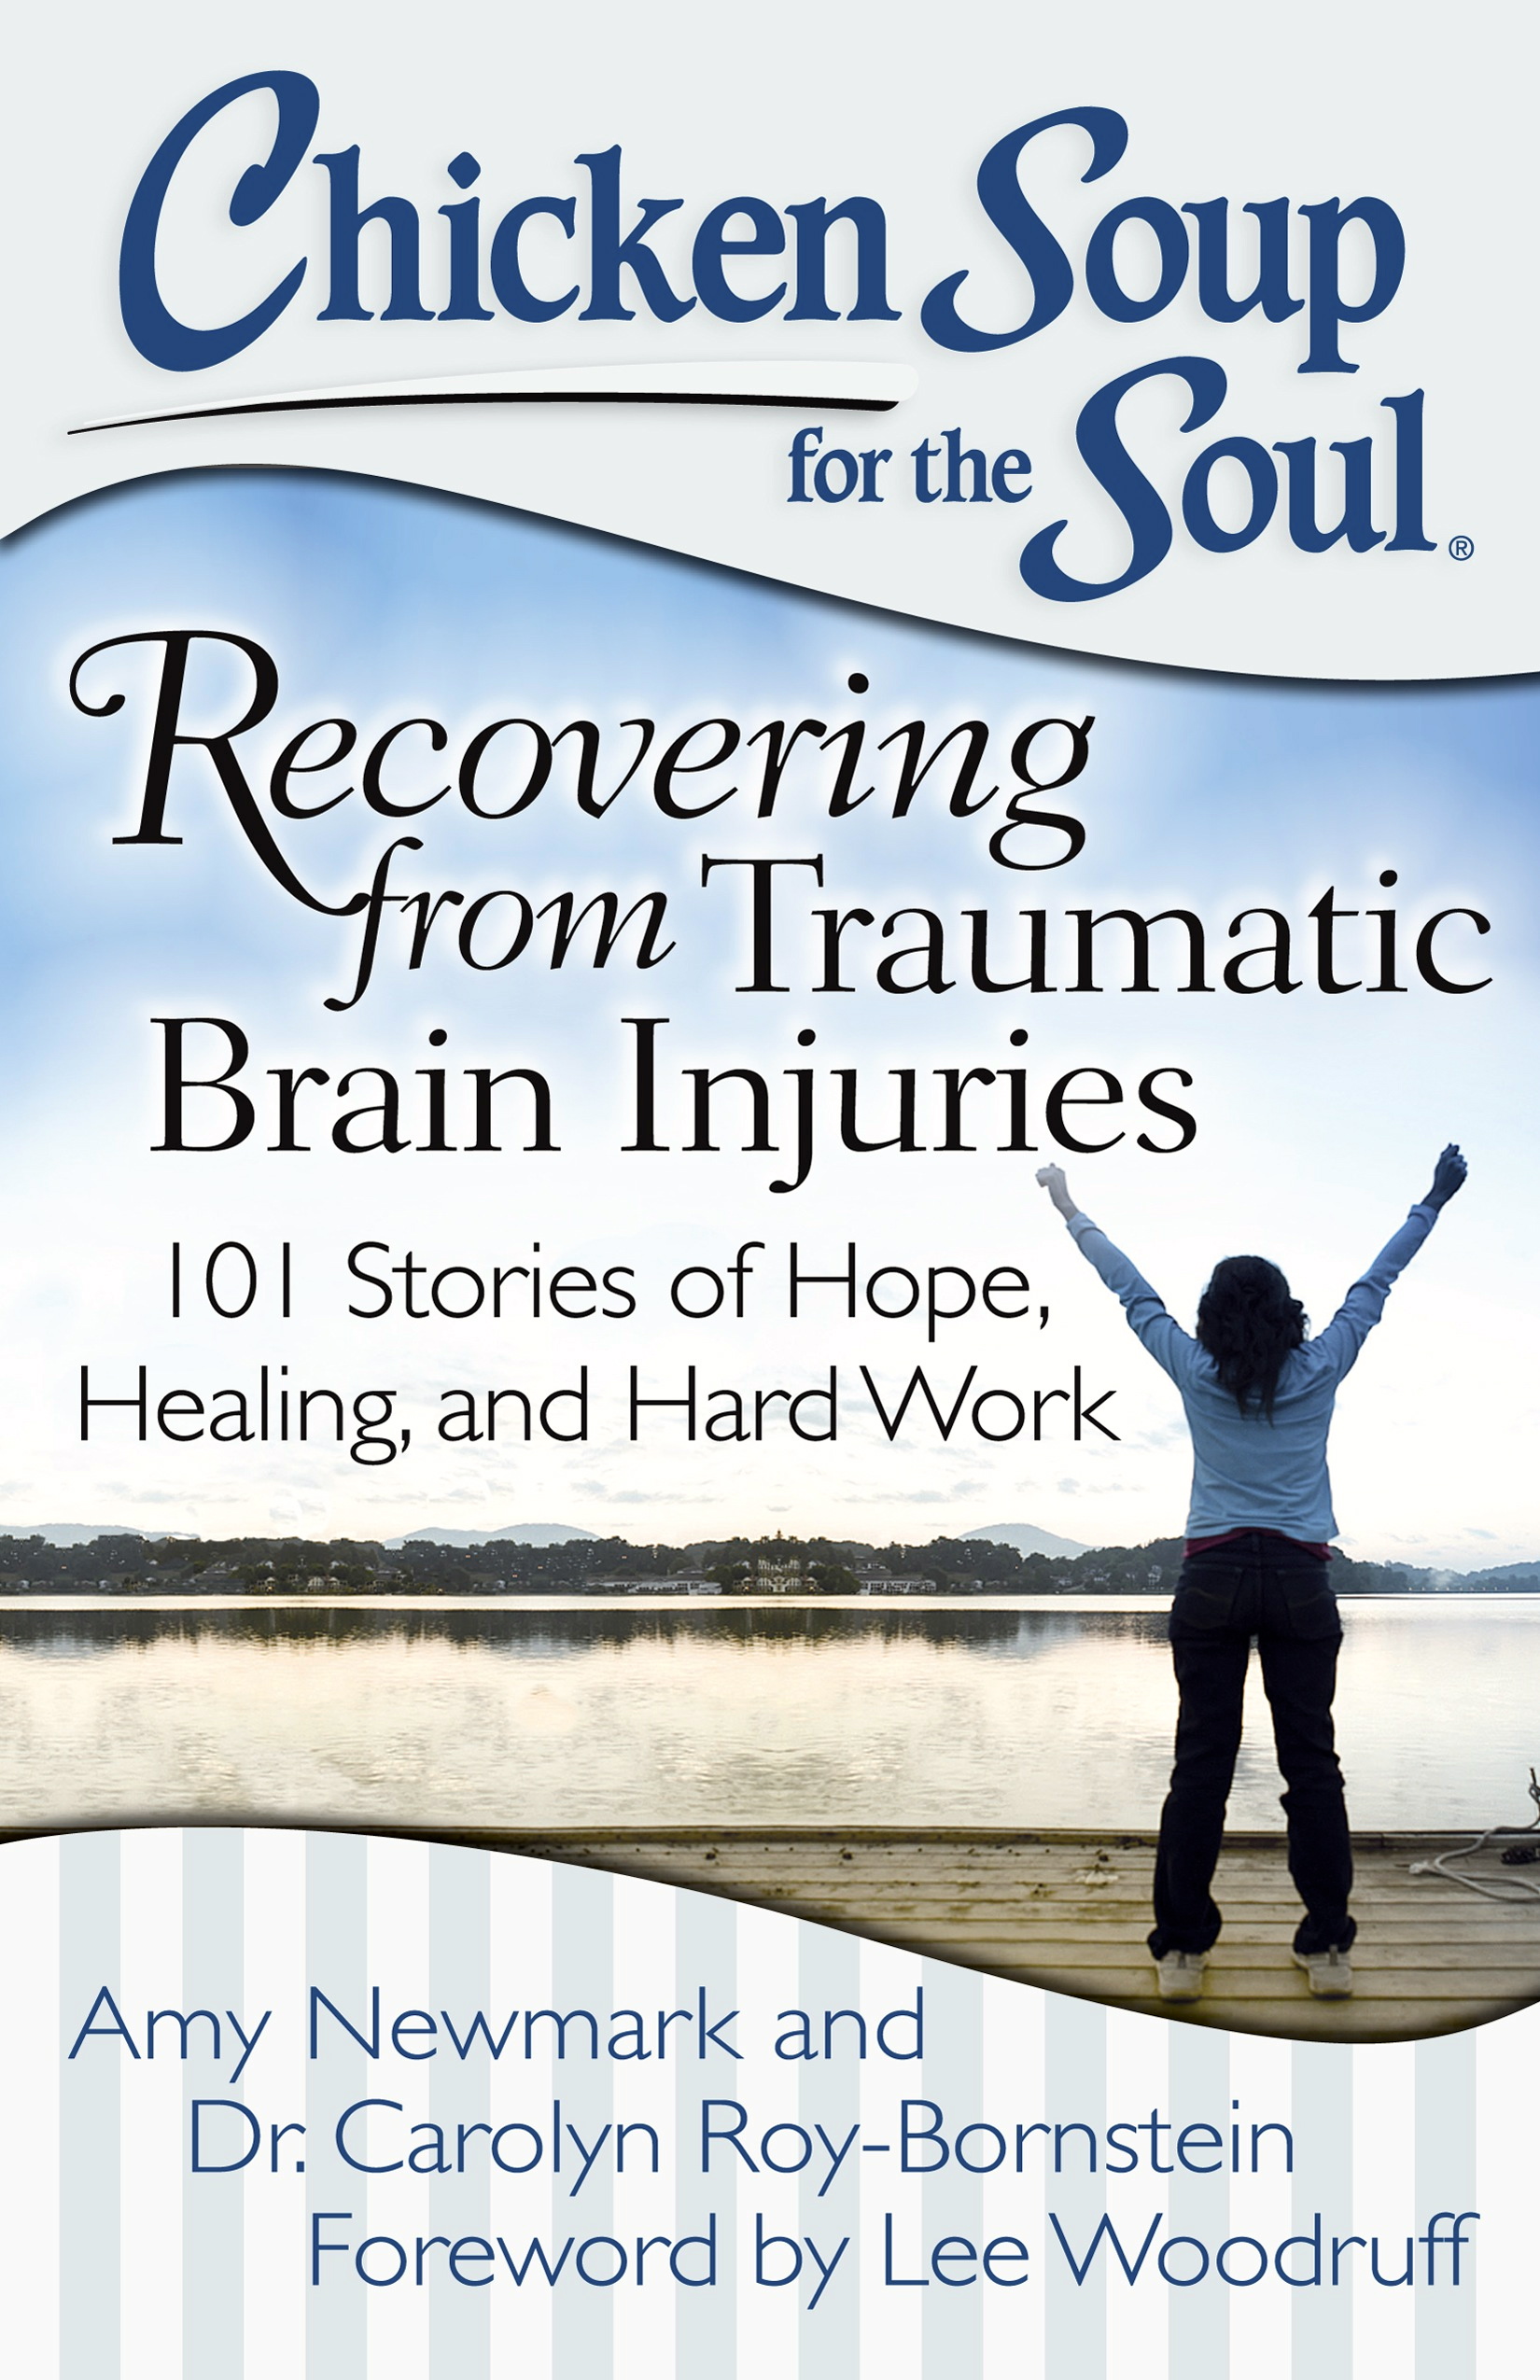 Chicken Soup for The Soul: Recovering from Traumatic Brain Injury